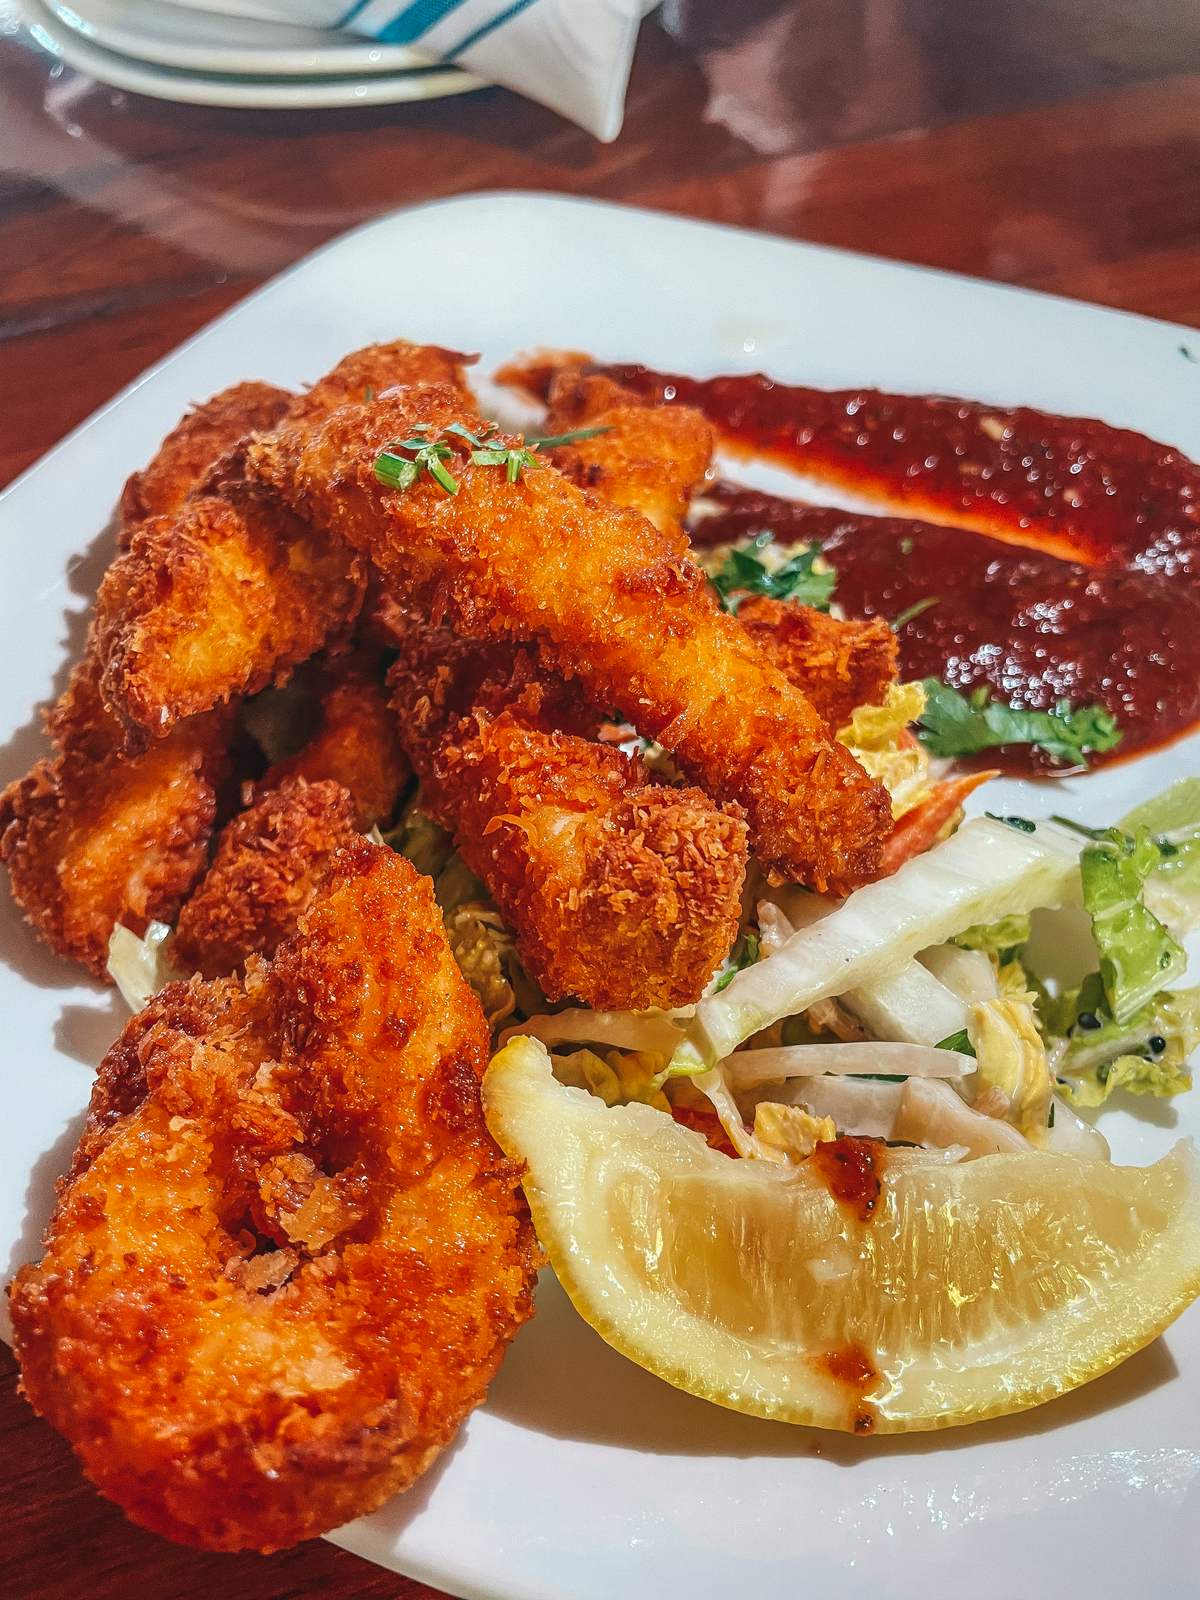 Coconut crusted calamari from Hula Grill, one of the best restaurants on Maui